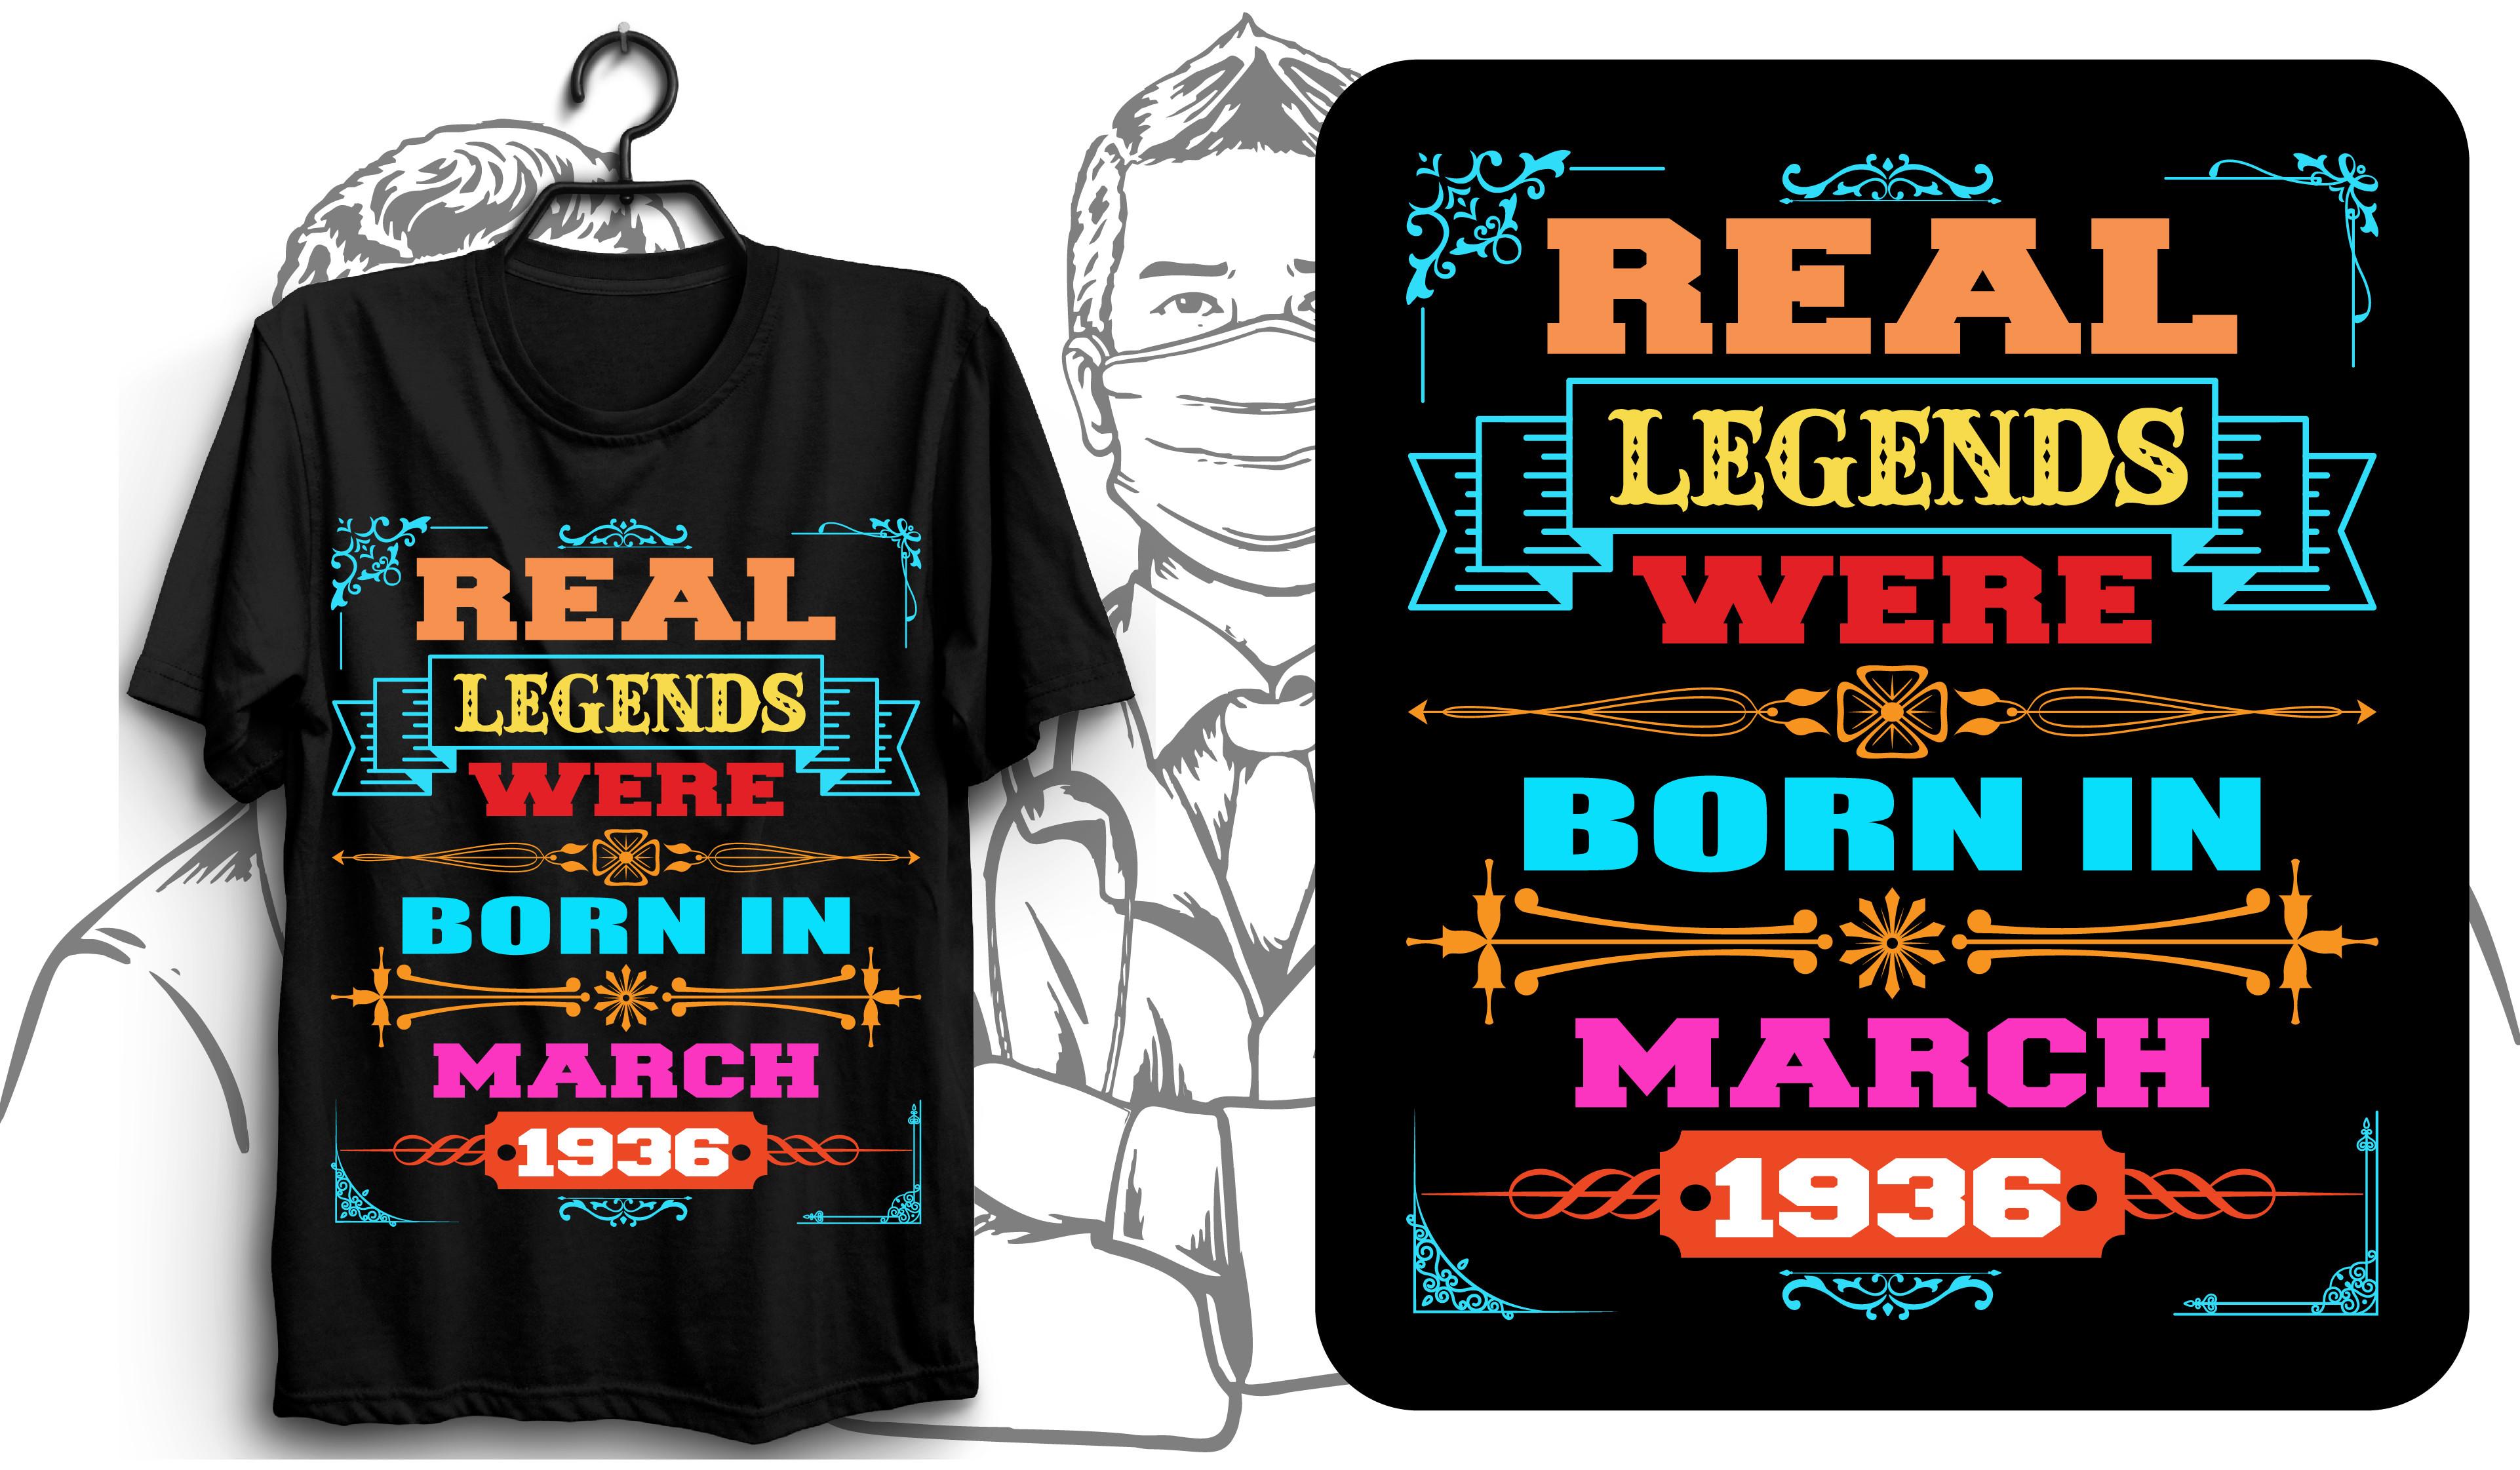 Real Legends Were Born in March 1936